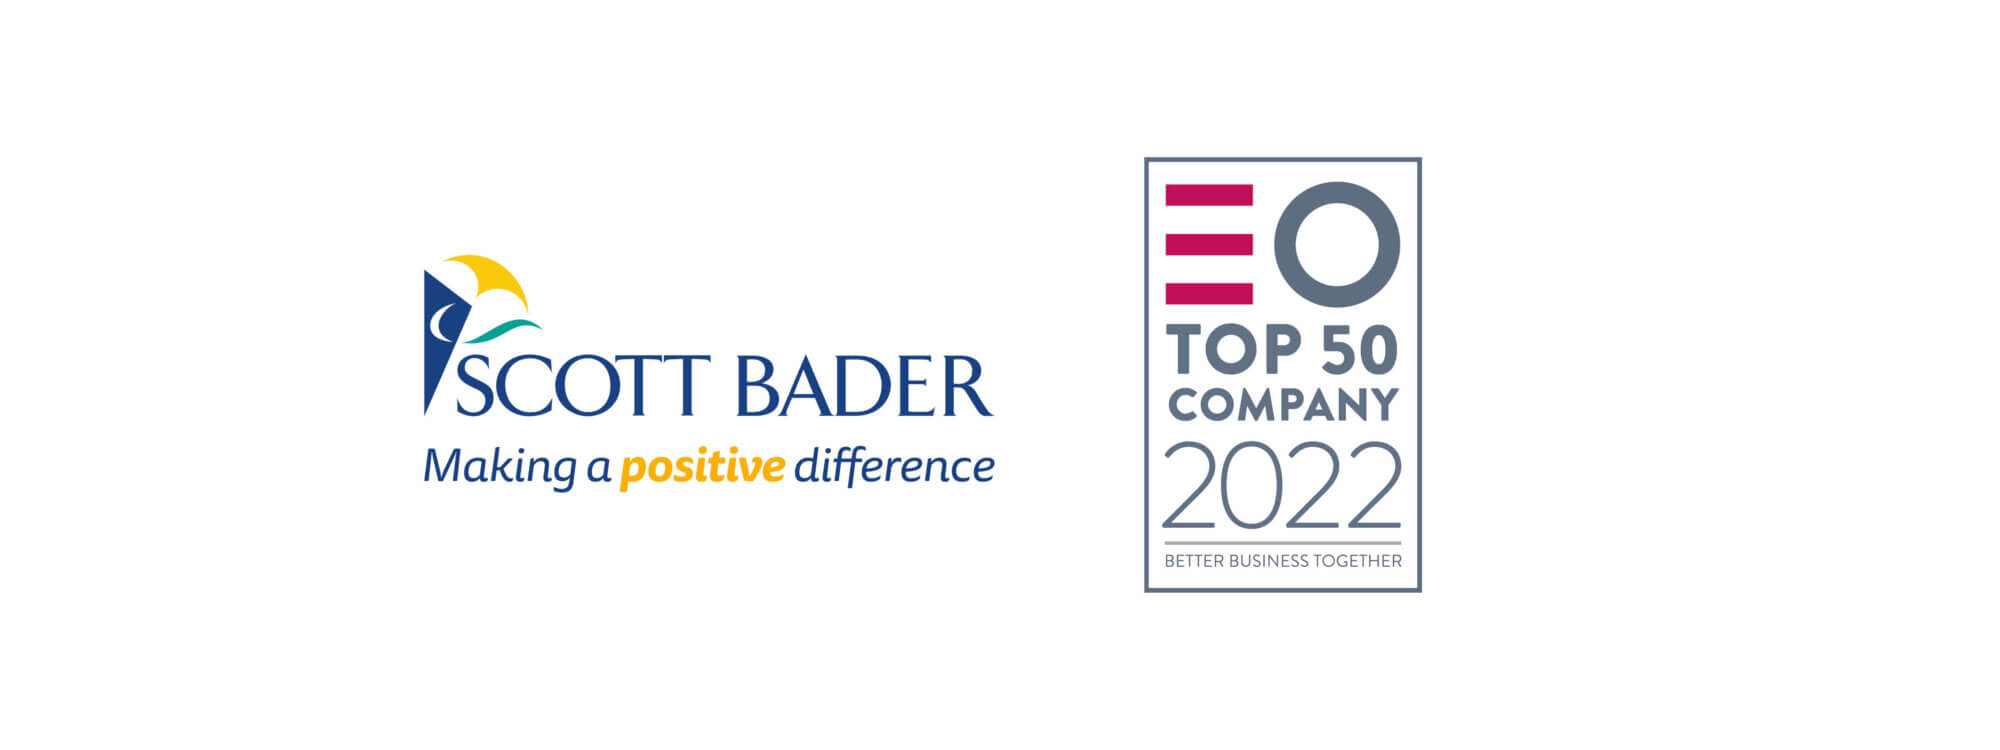 Scott Bader UK features in the Employee Ownership Top 50 2022 report